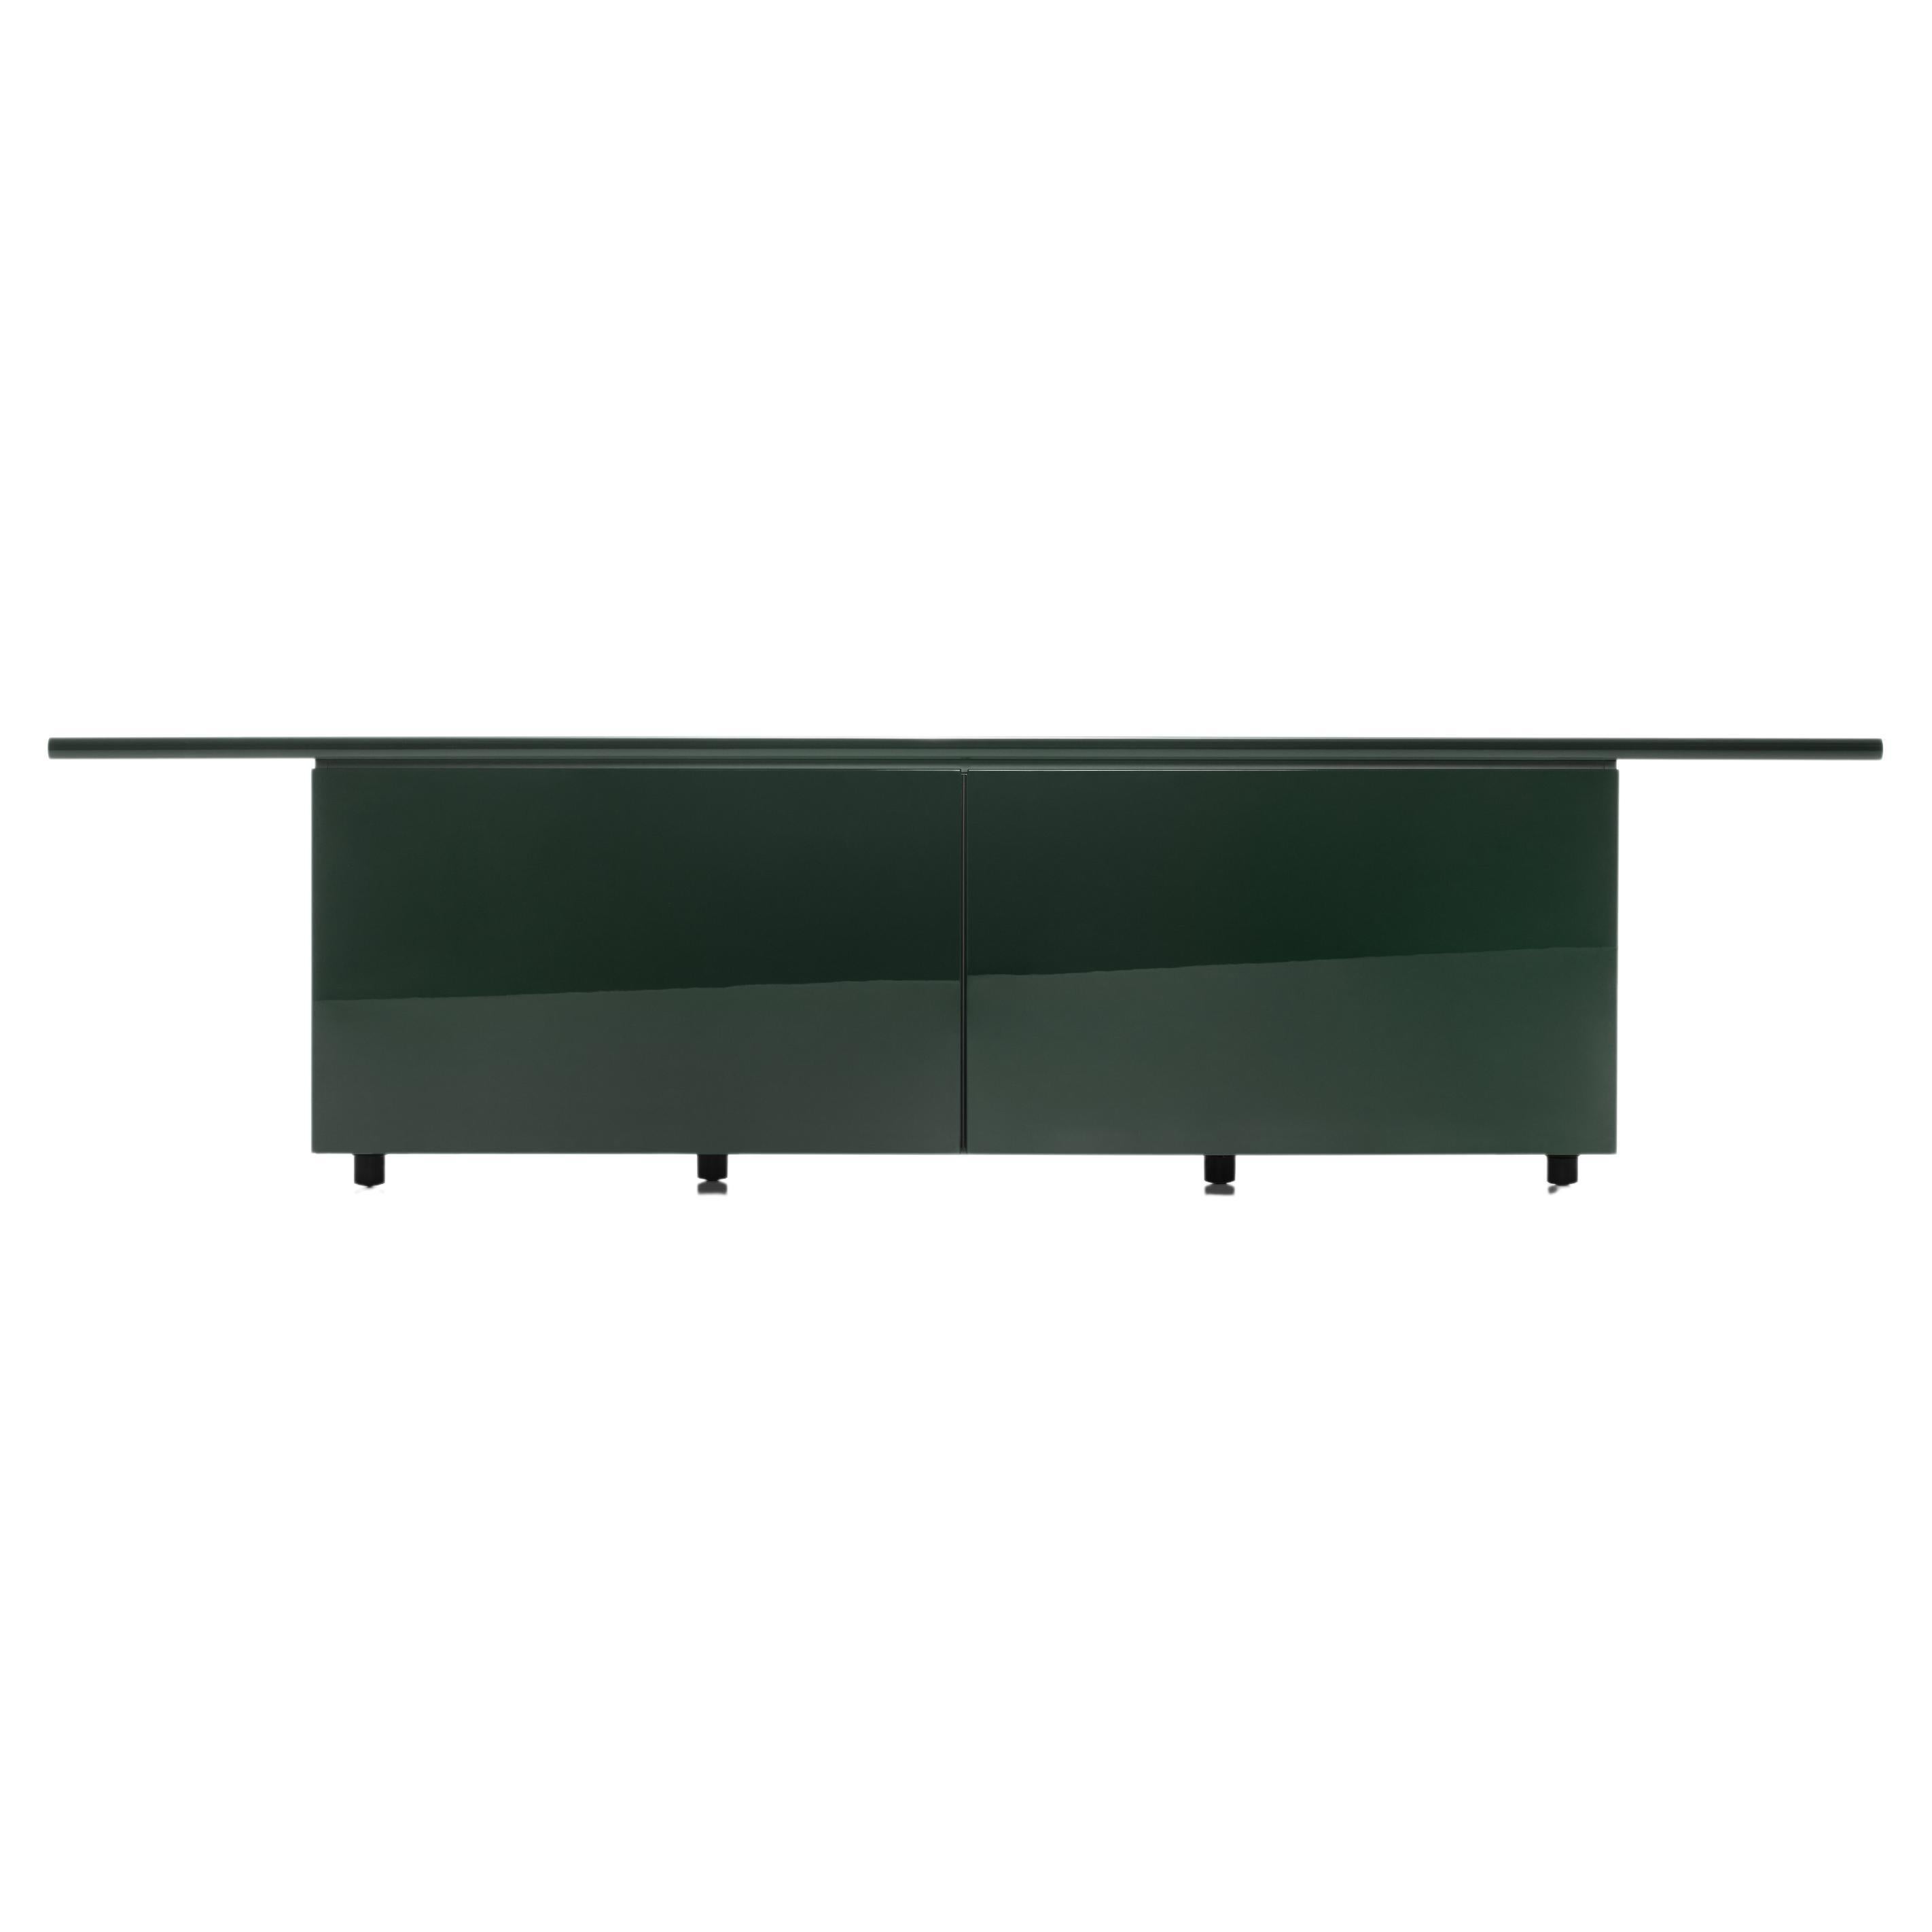 Acerbis Sheraton Sideboards in Black Glossy Lacquered Top with Doors